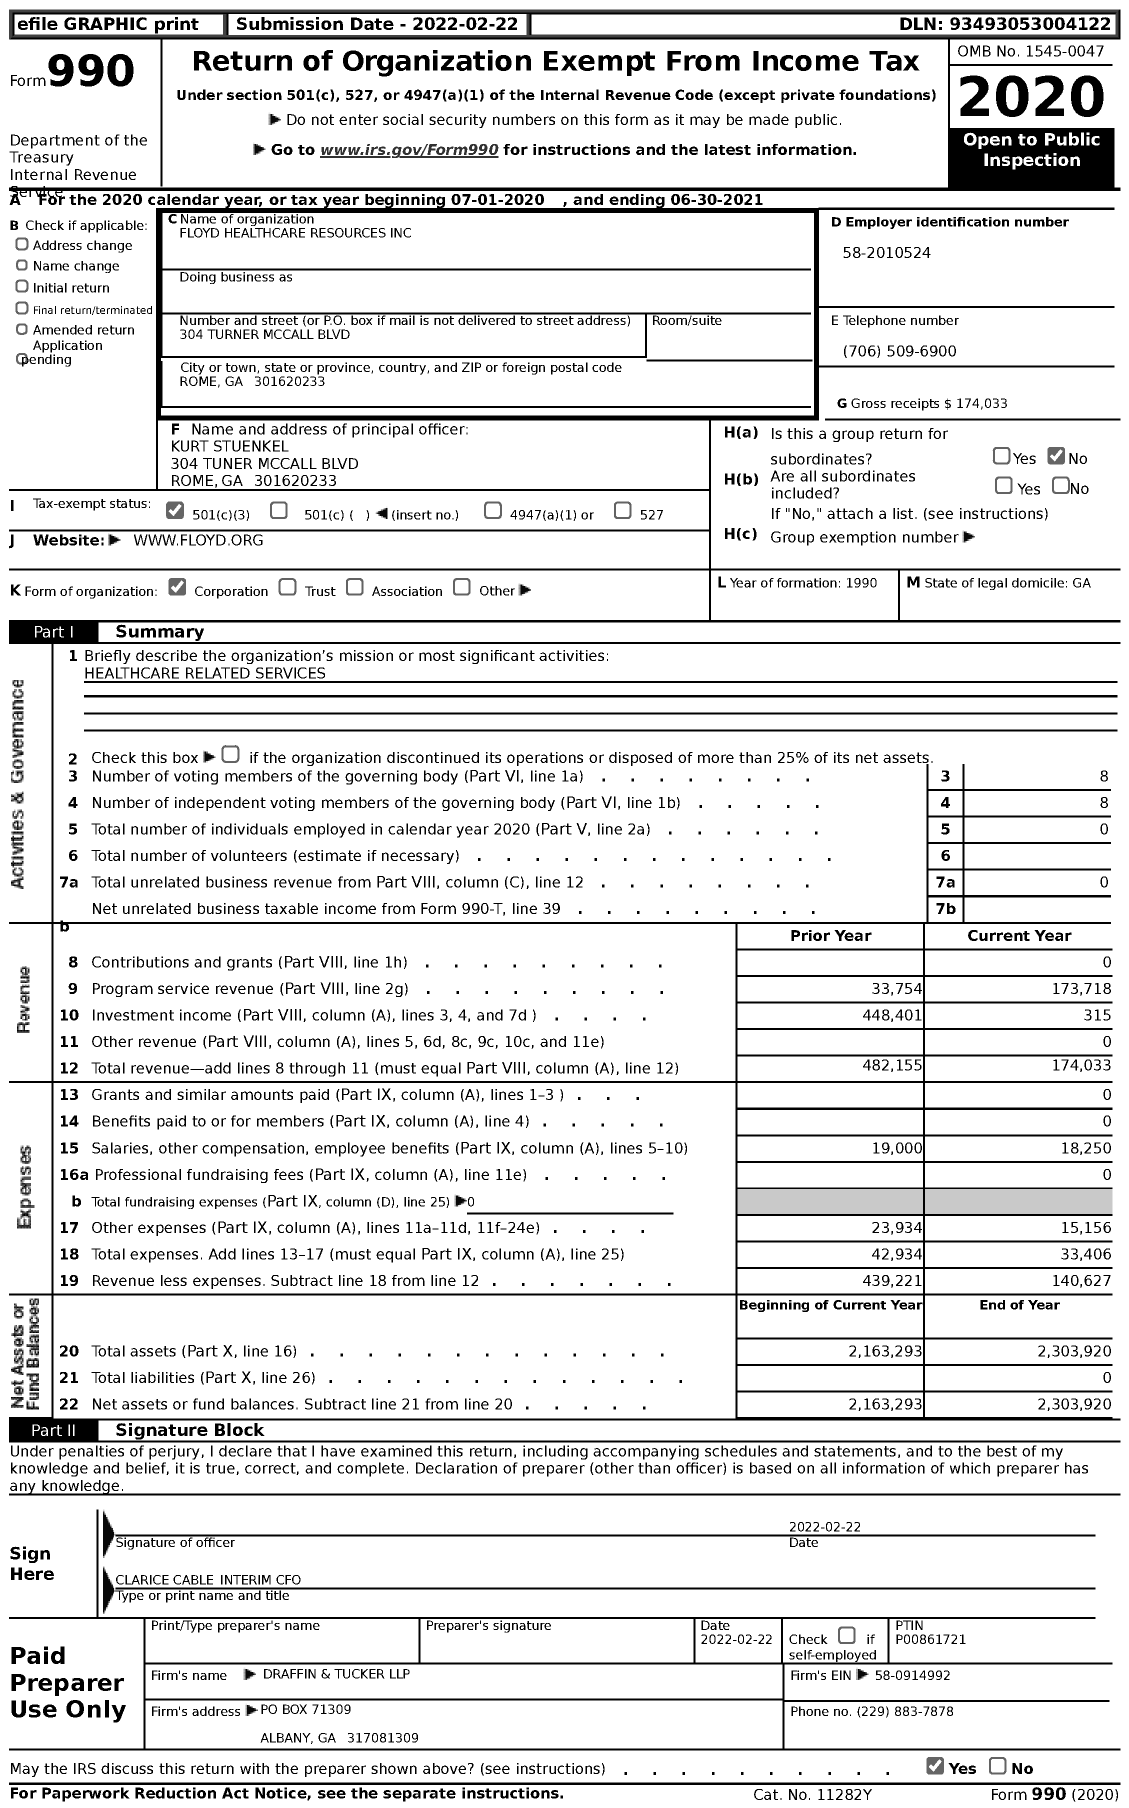 Image of first page of 2020 Form 990 for Floyd Healthcare Resources